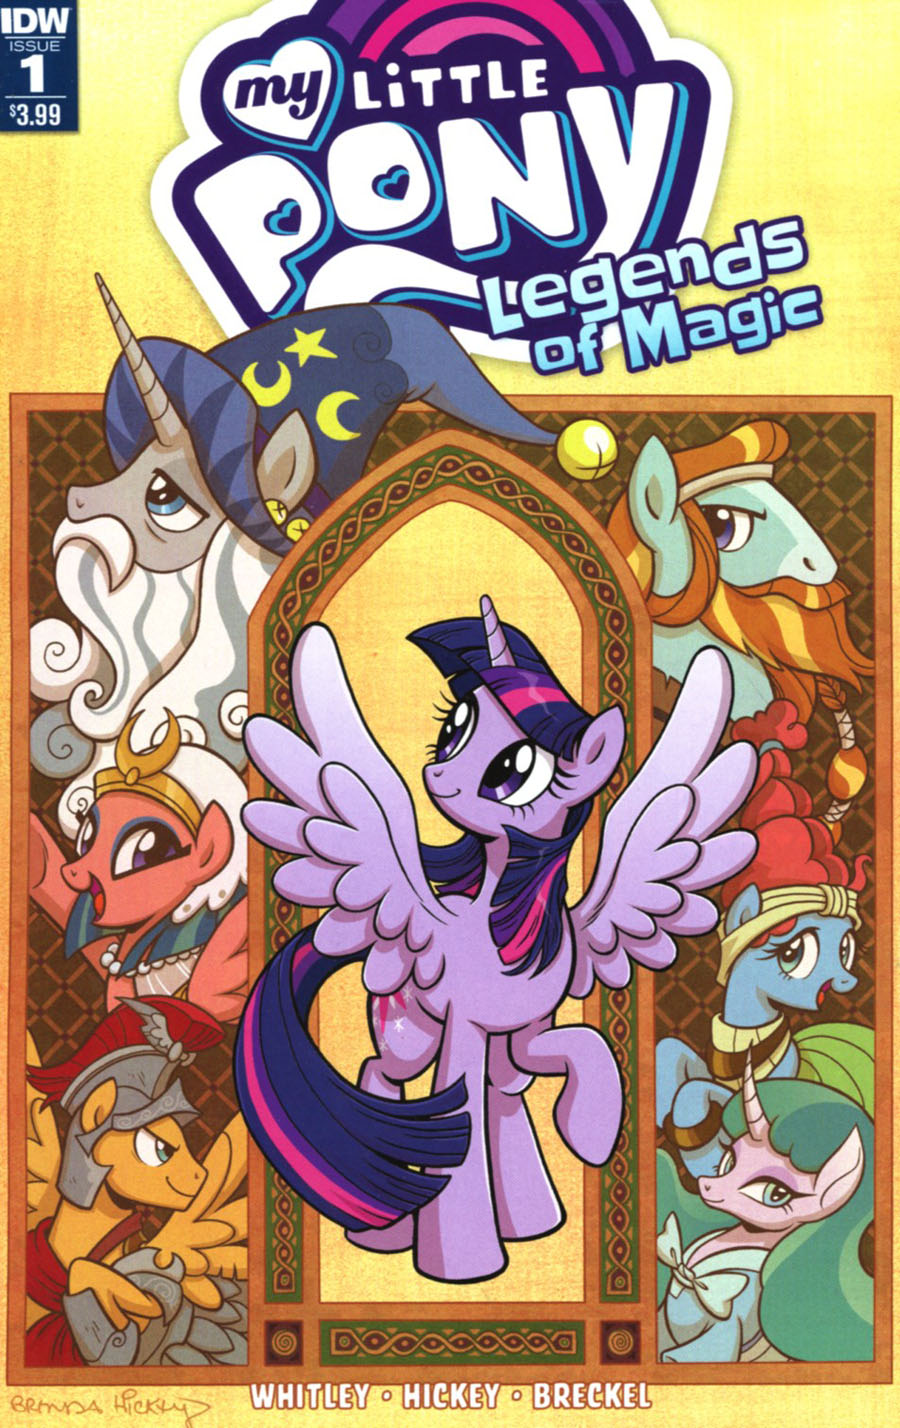 My Little Pony Legends Of Magic #1 Cover A Regular Brenda Hickey Cover